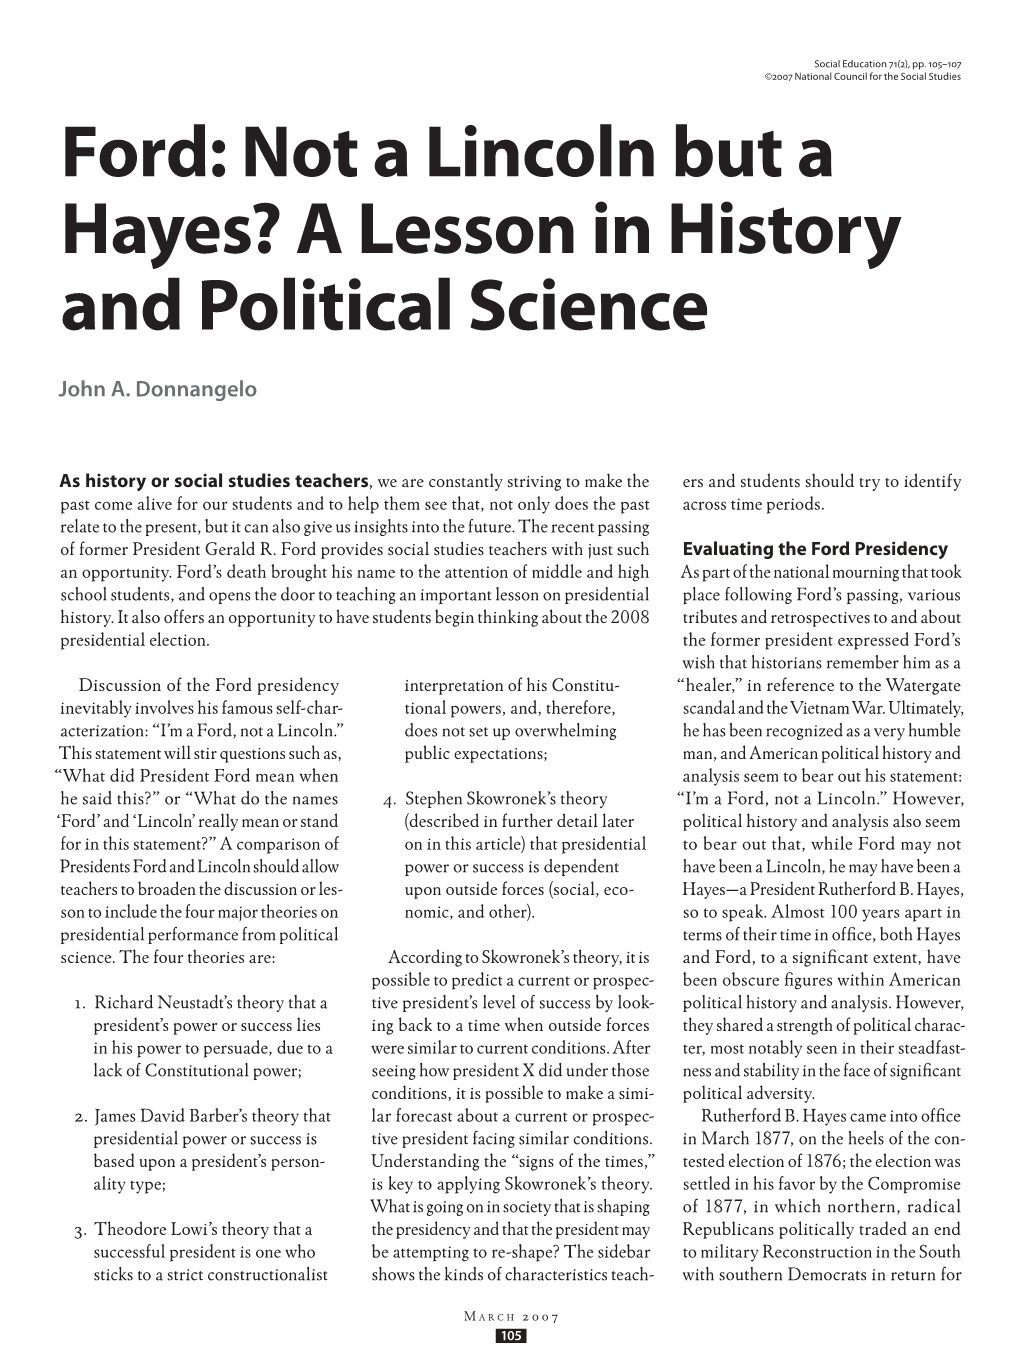 Ford: Not a Lincoln but a Hayes? a Lesson in History and Political Science